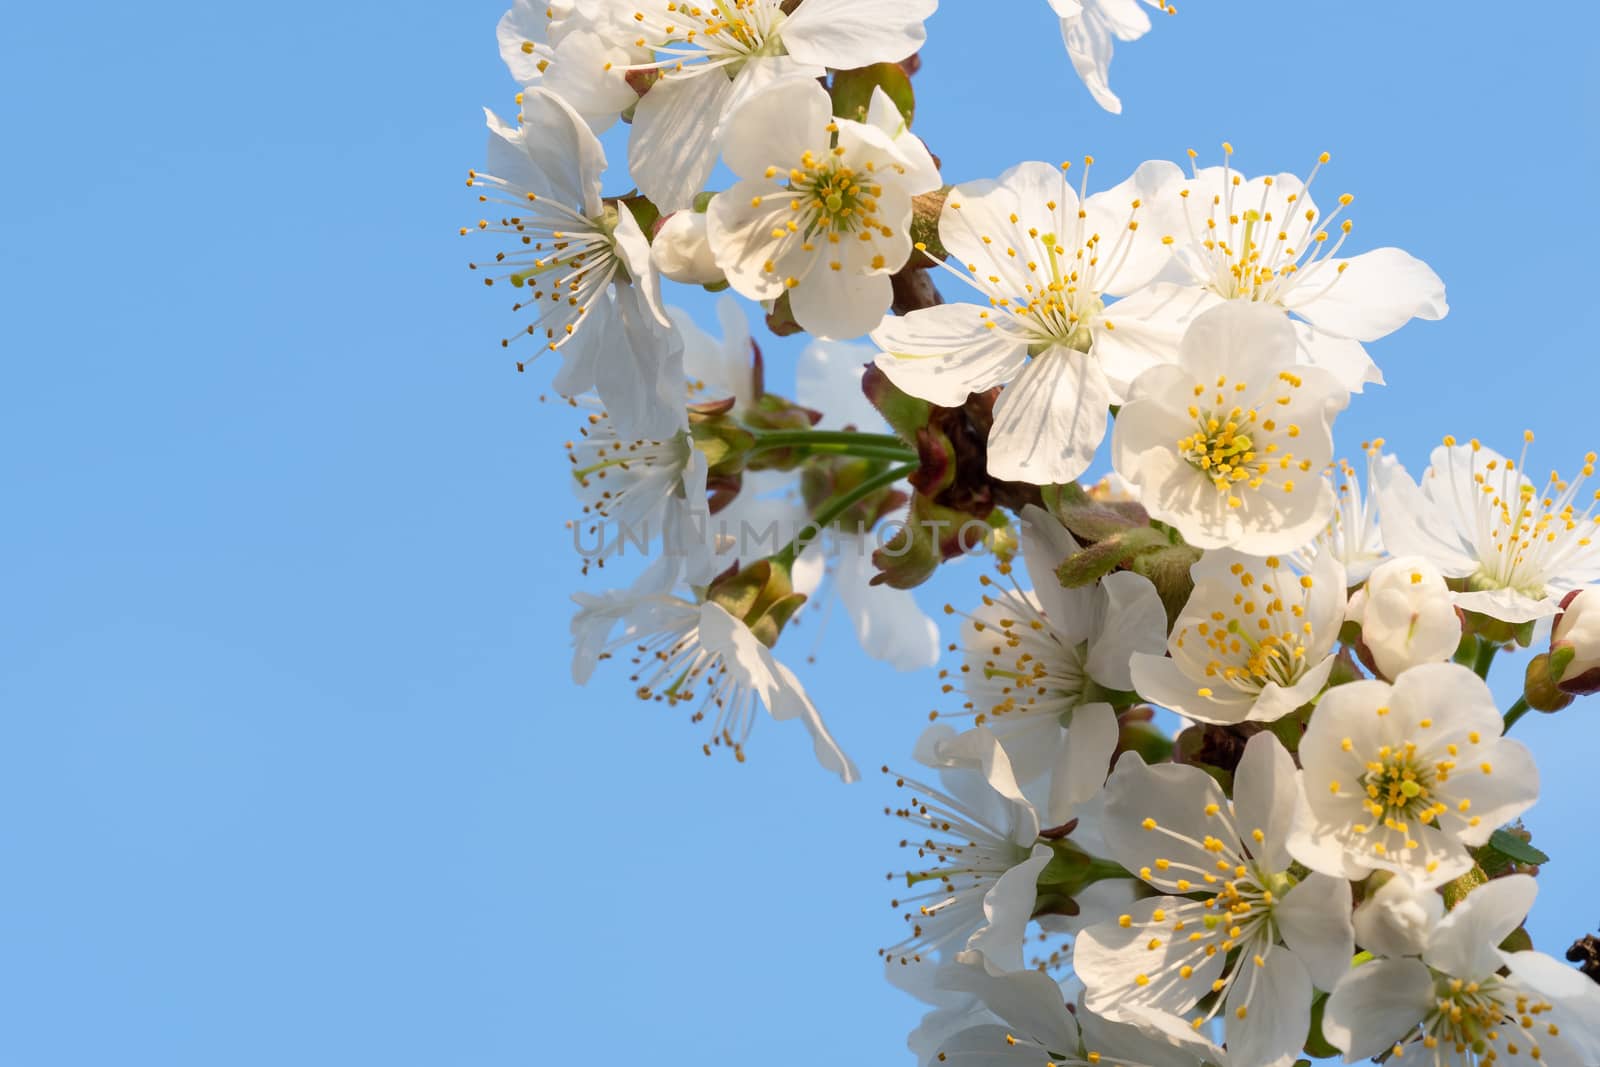 Cherry Blossoms on a blue sky. Spring floral background. Cherry flowers blossoming in the springtime.